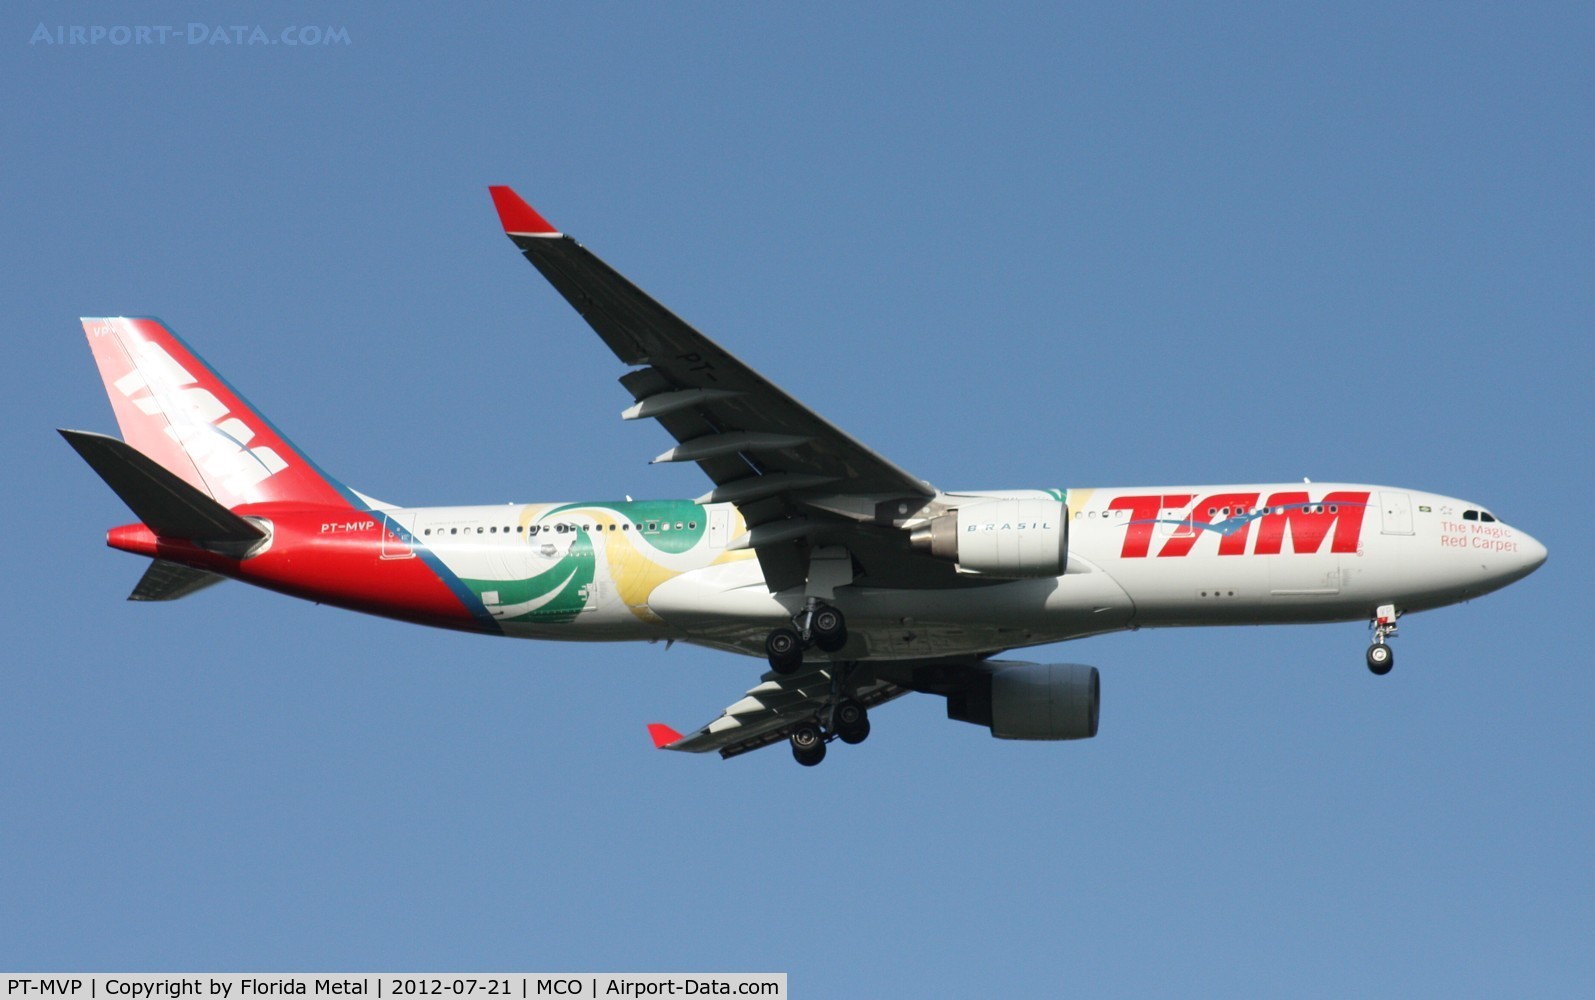 PT-MVP, 2008 Airbus A330-223 C/N 961, TAM Special soccer colors A330